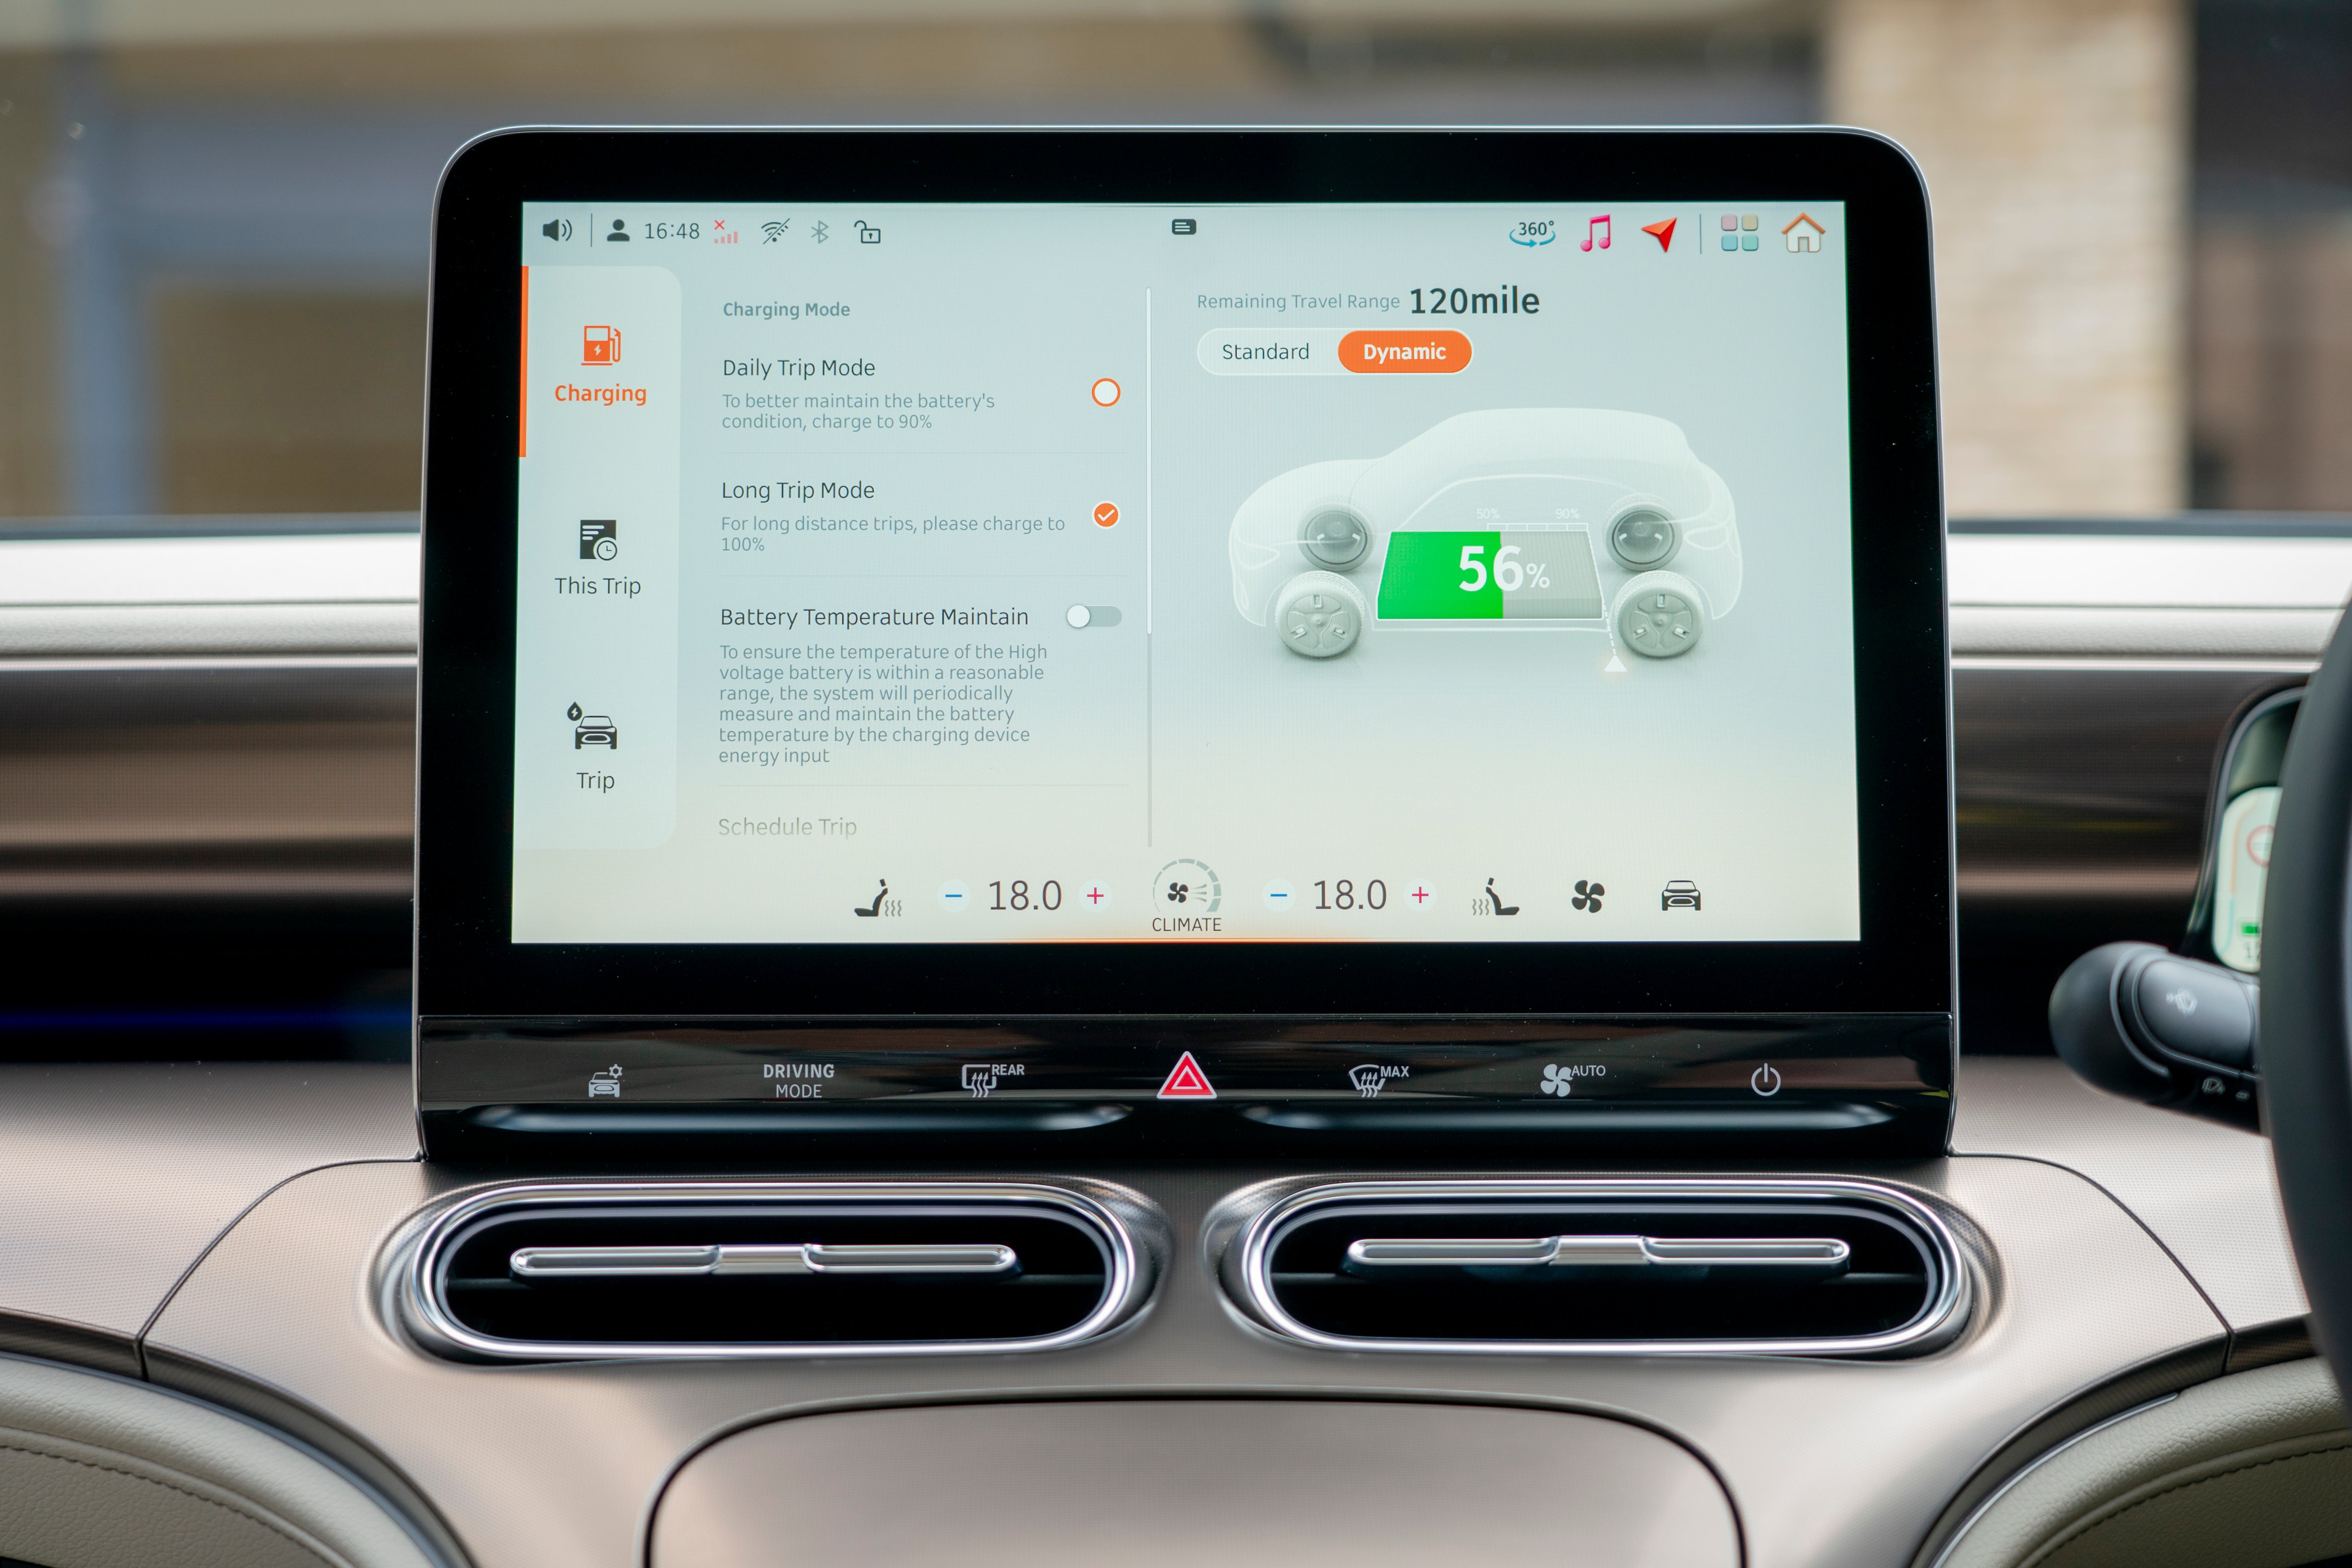 The touchscreen controls work in a slightly different way and are therefore harder to navigate